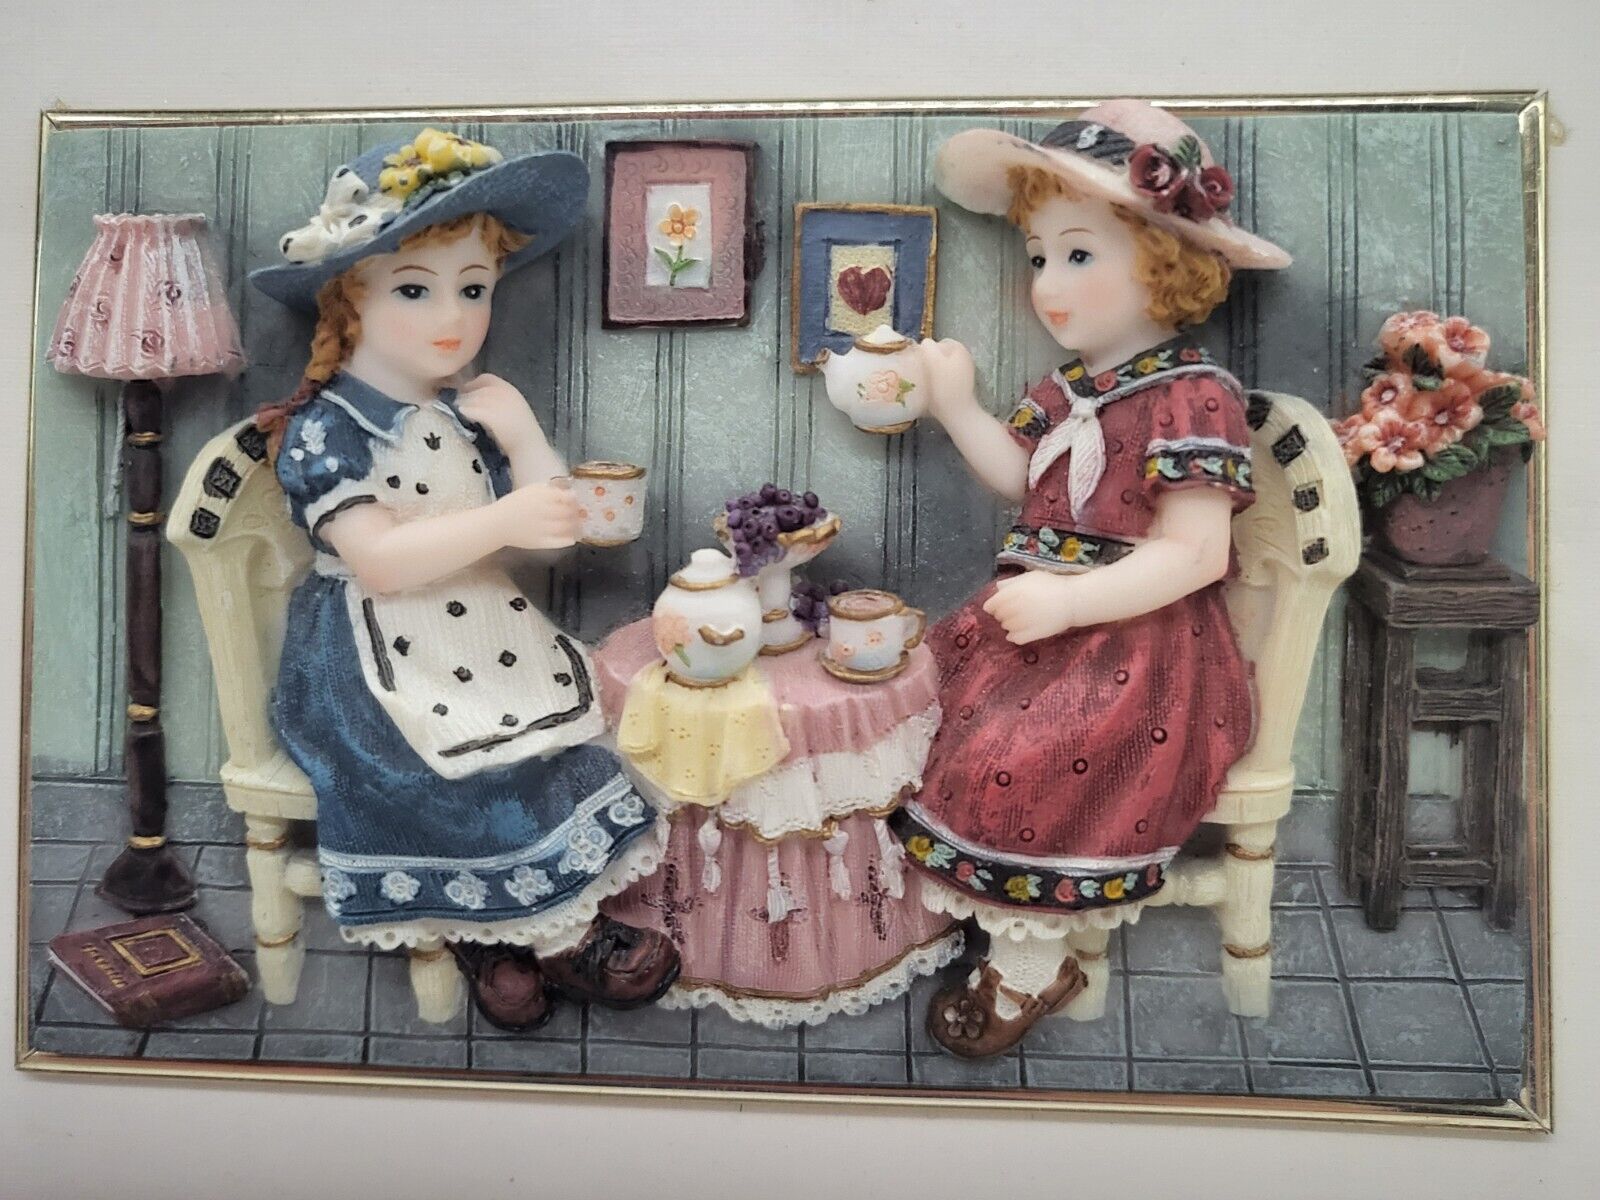 Hand Painted 3D Art Frame By A. Richesco Corp. Tea Party. 8.75 X 6.75 Inches